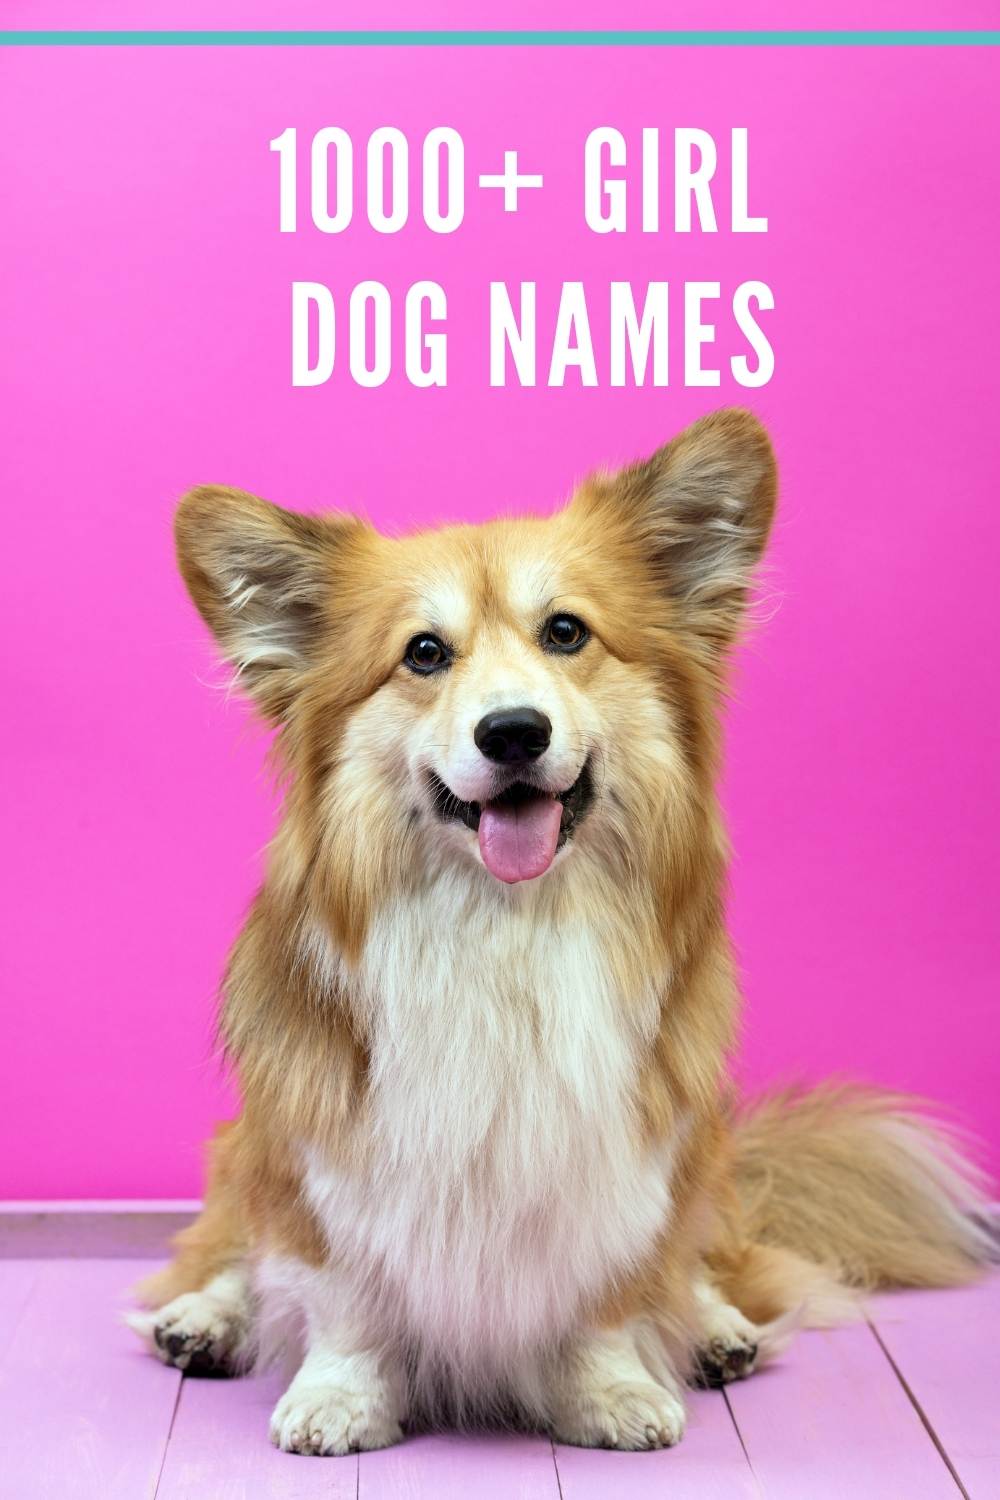 1000 Girl Dog Names And Meanings For Your Fur Baby, 60% OFF